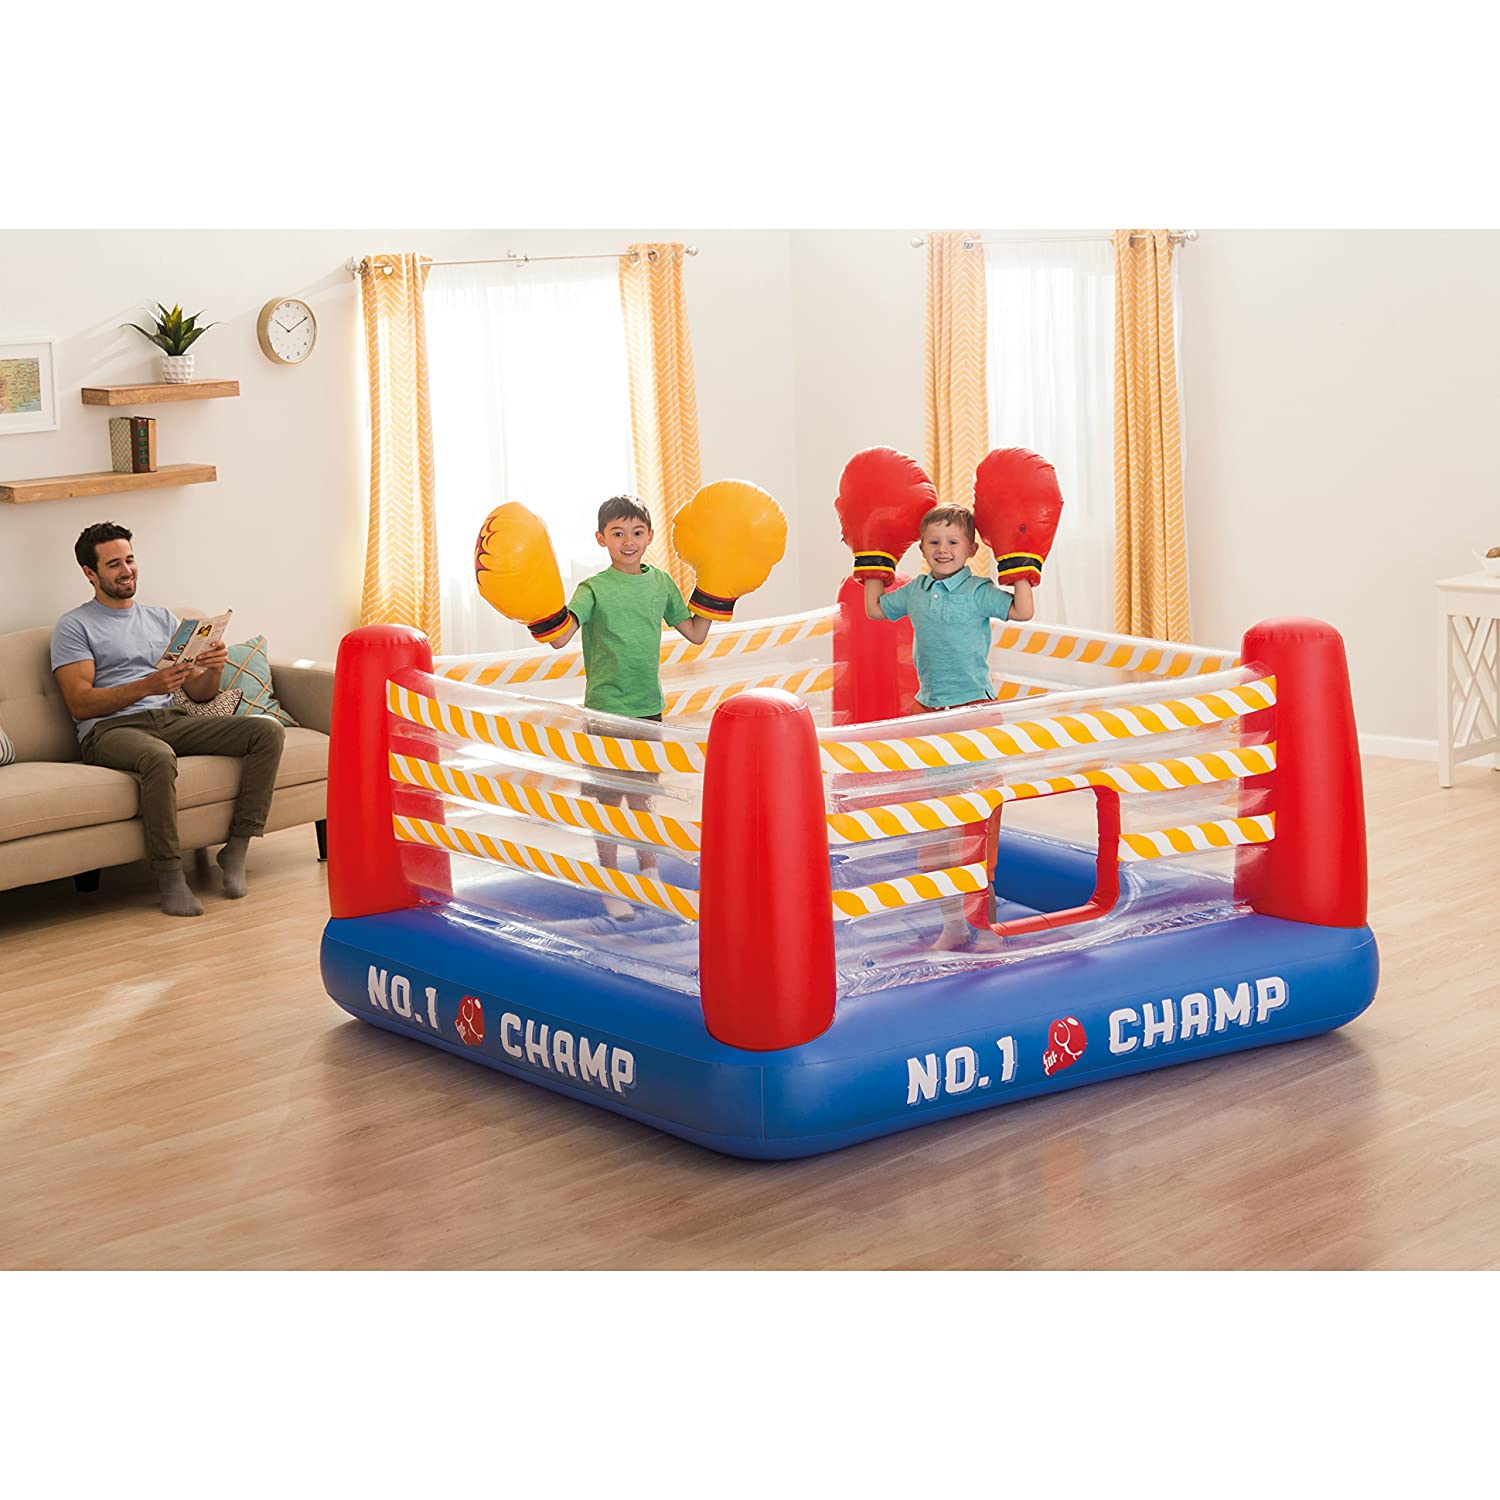 Intex Jump-O-Lene Boxing Ring Inflatable Bouncer, 89" X 89" X 43.5", for Ages 5-7